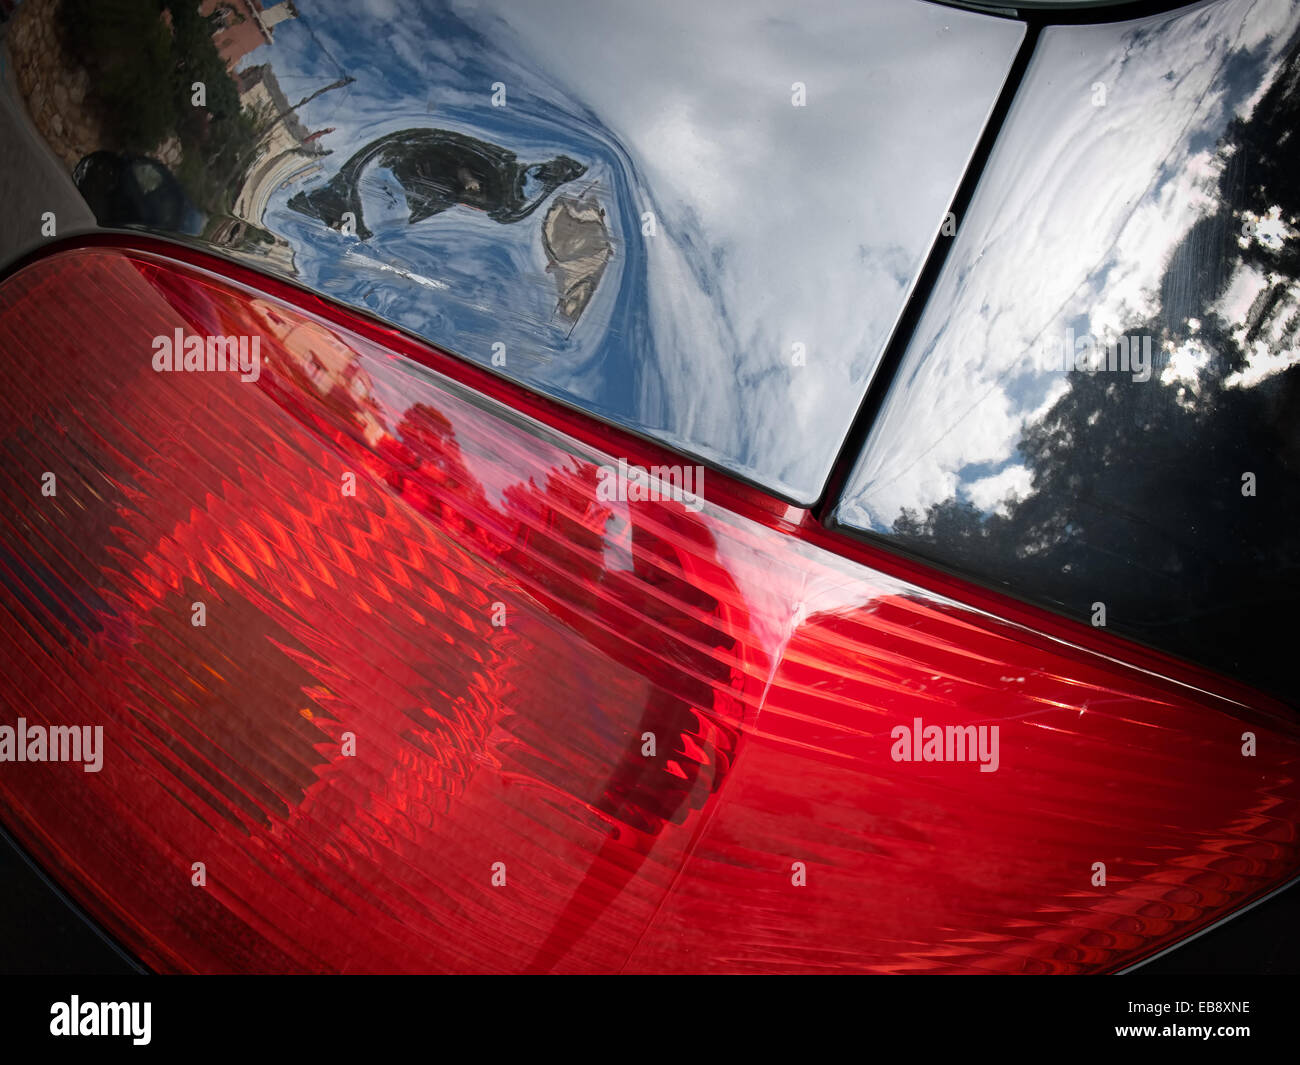 Dented tailgate of a car above the rear light. Stock Photo